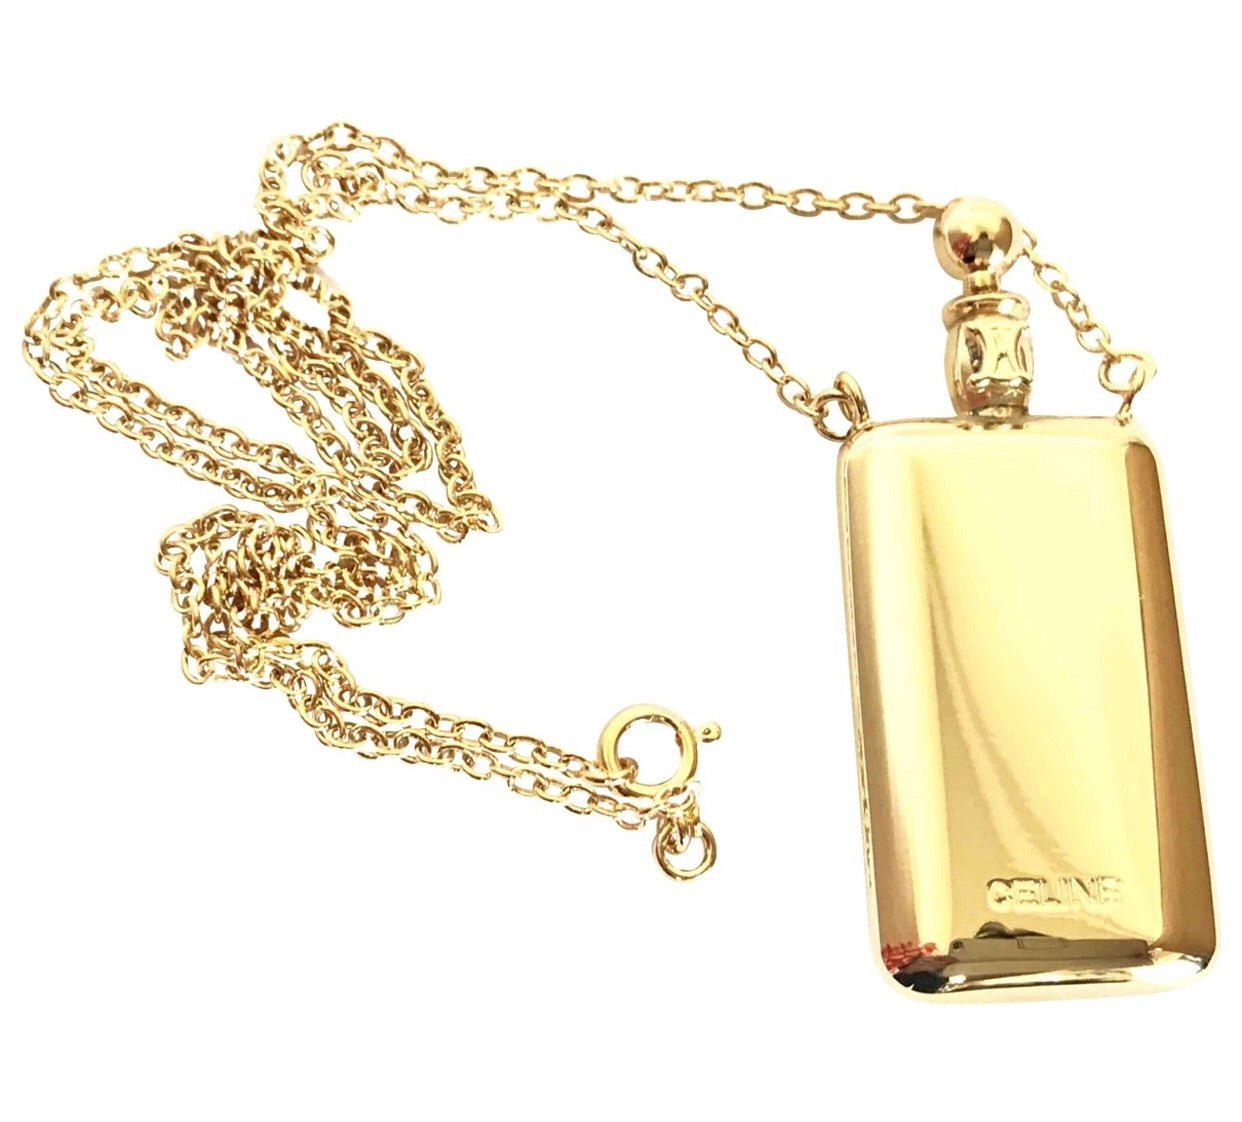 Vintage Celine gold tone long necklace with perfume bottle charm pendant top and blaison logo. Rare old jewelry piece. Must have.